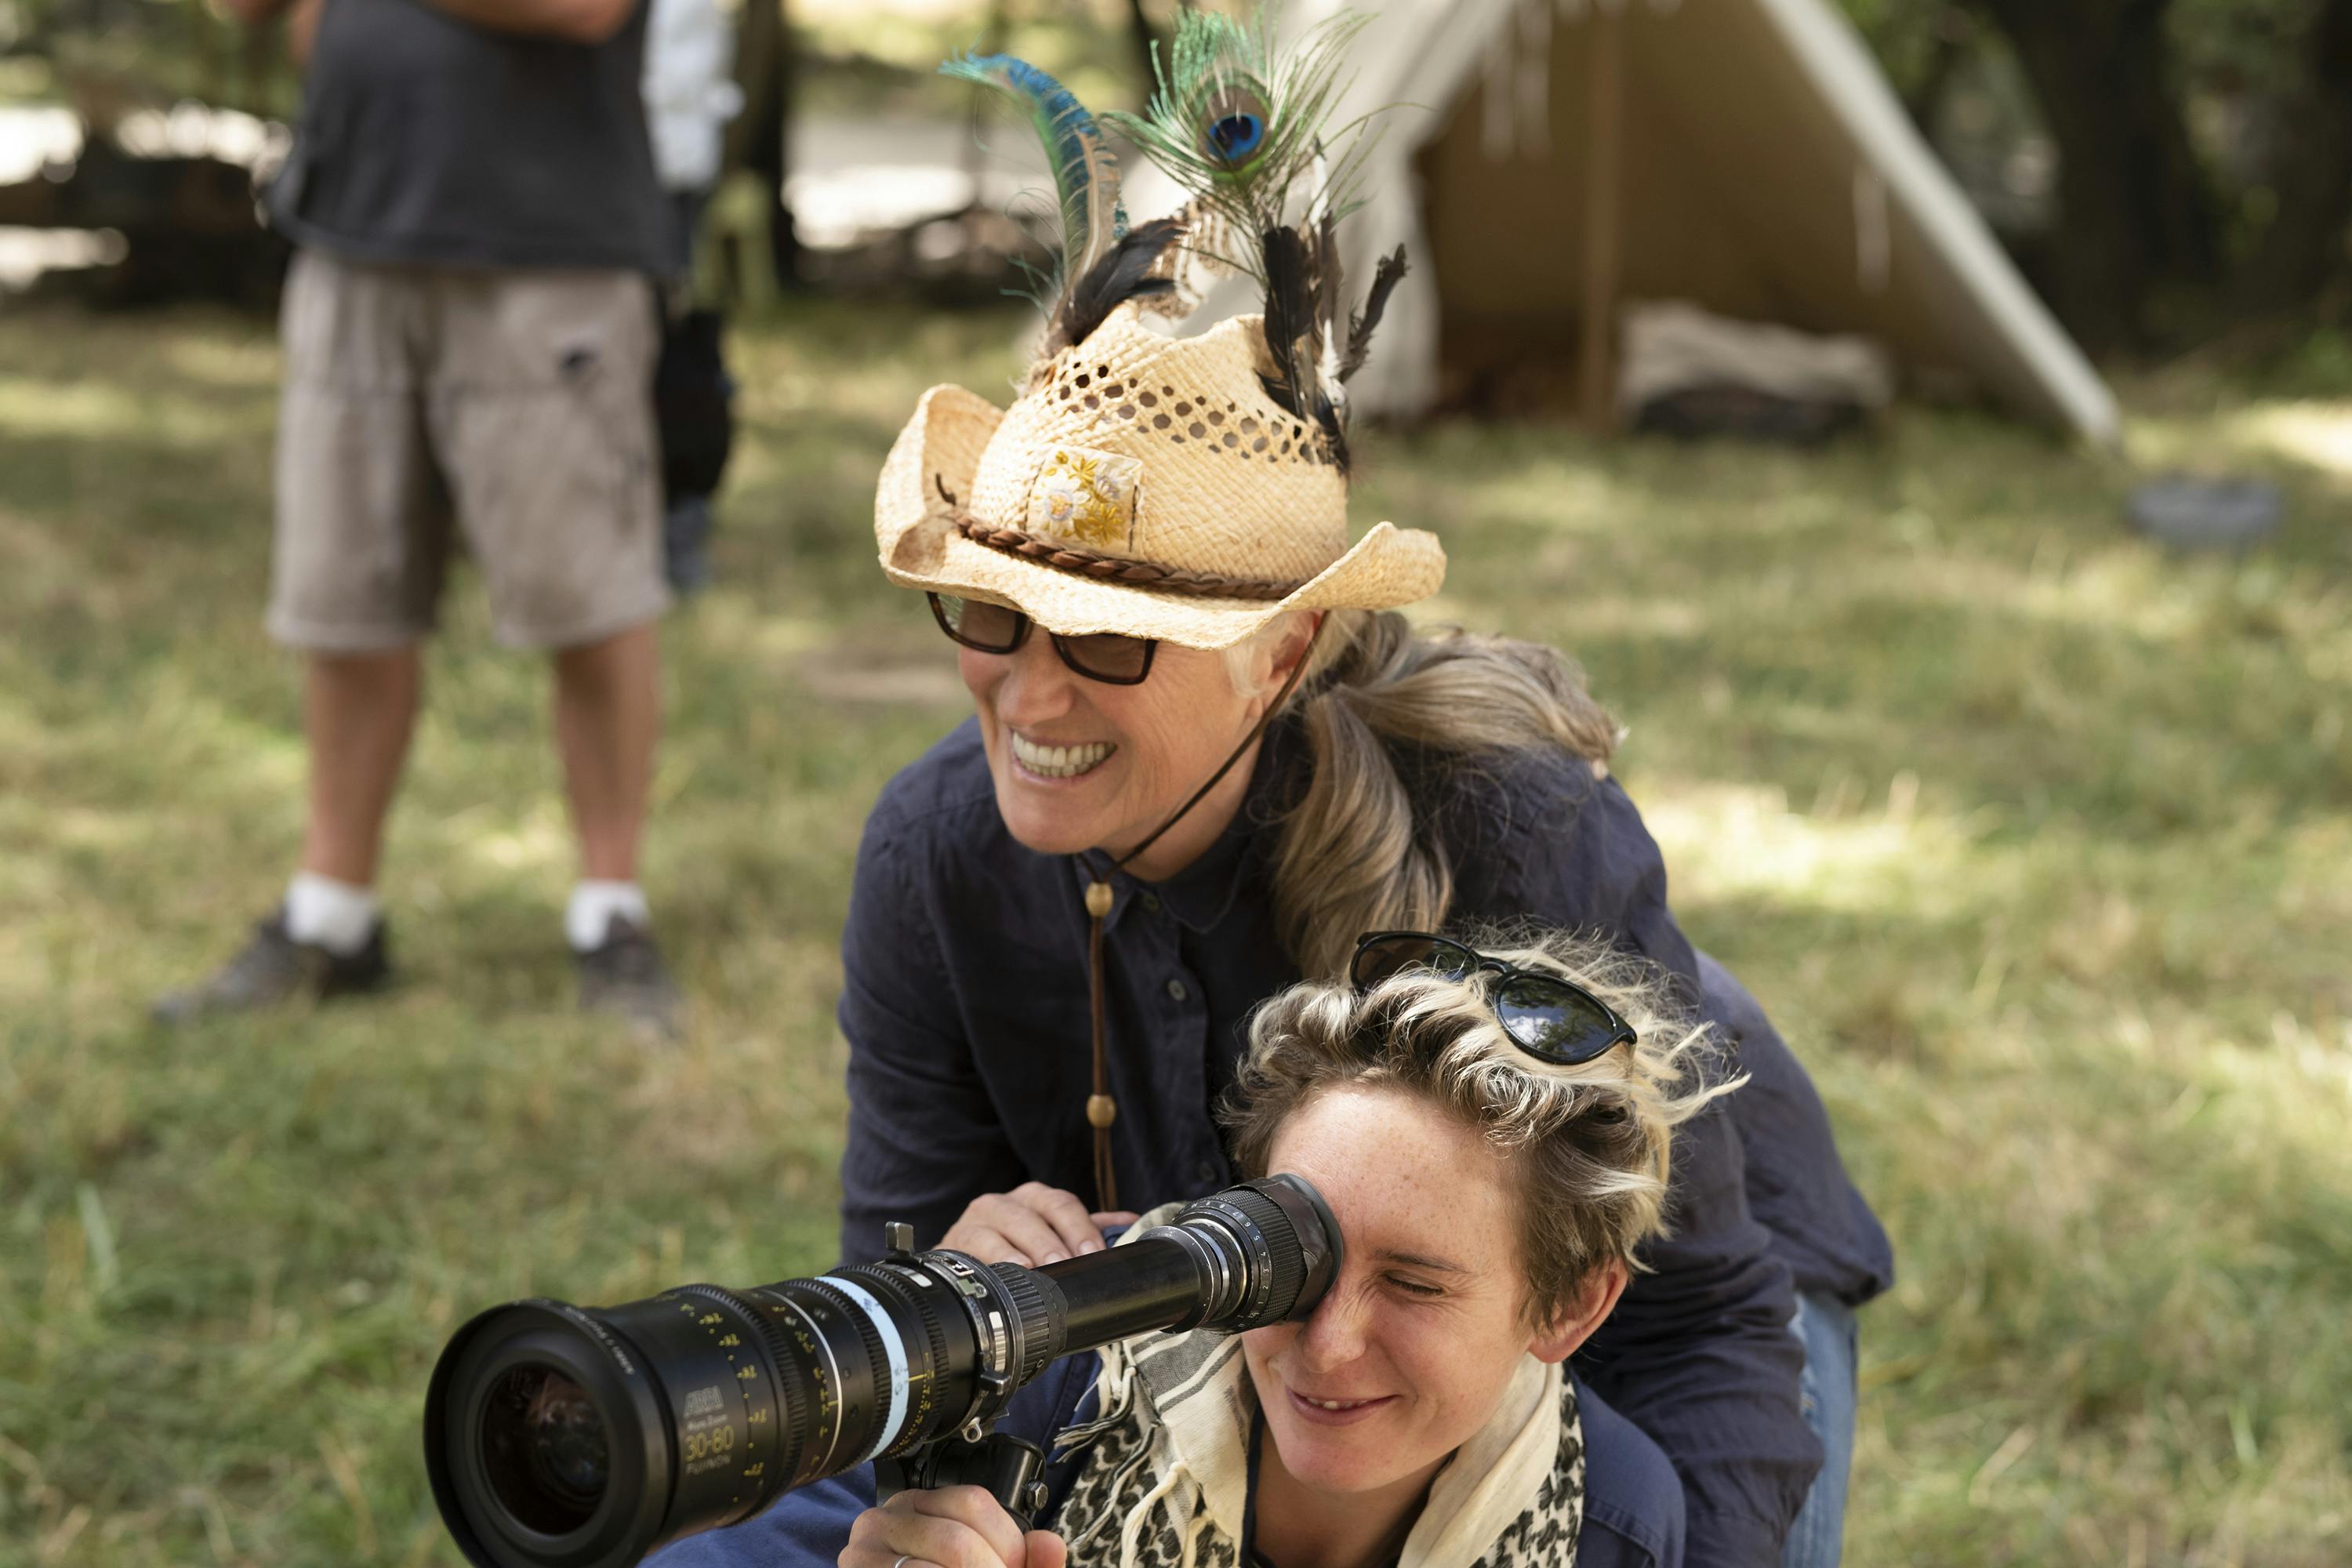 Cinematographer Ari Wegner and Director Jane Campion on the set of The Power of the Dog looking through a scope together to frame up a scene. 